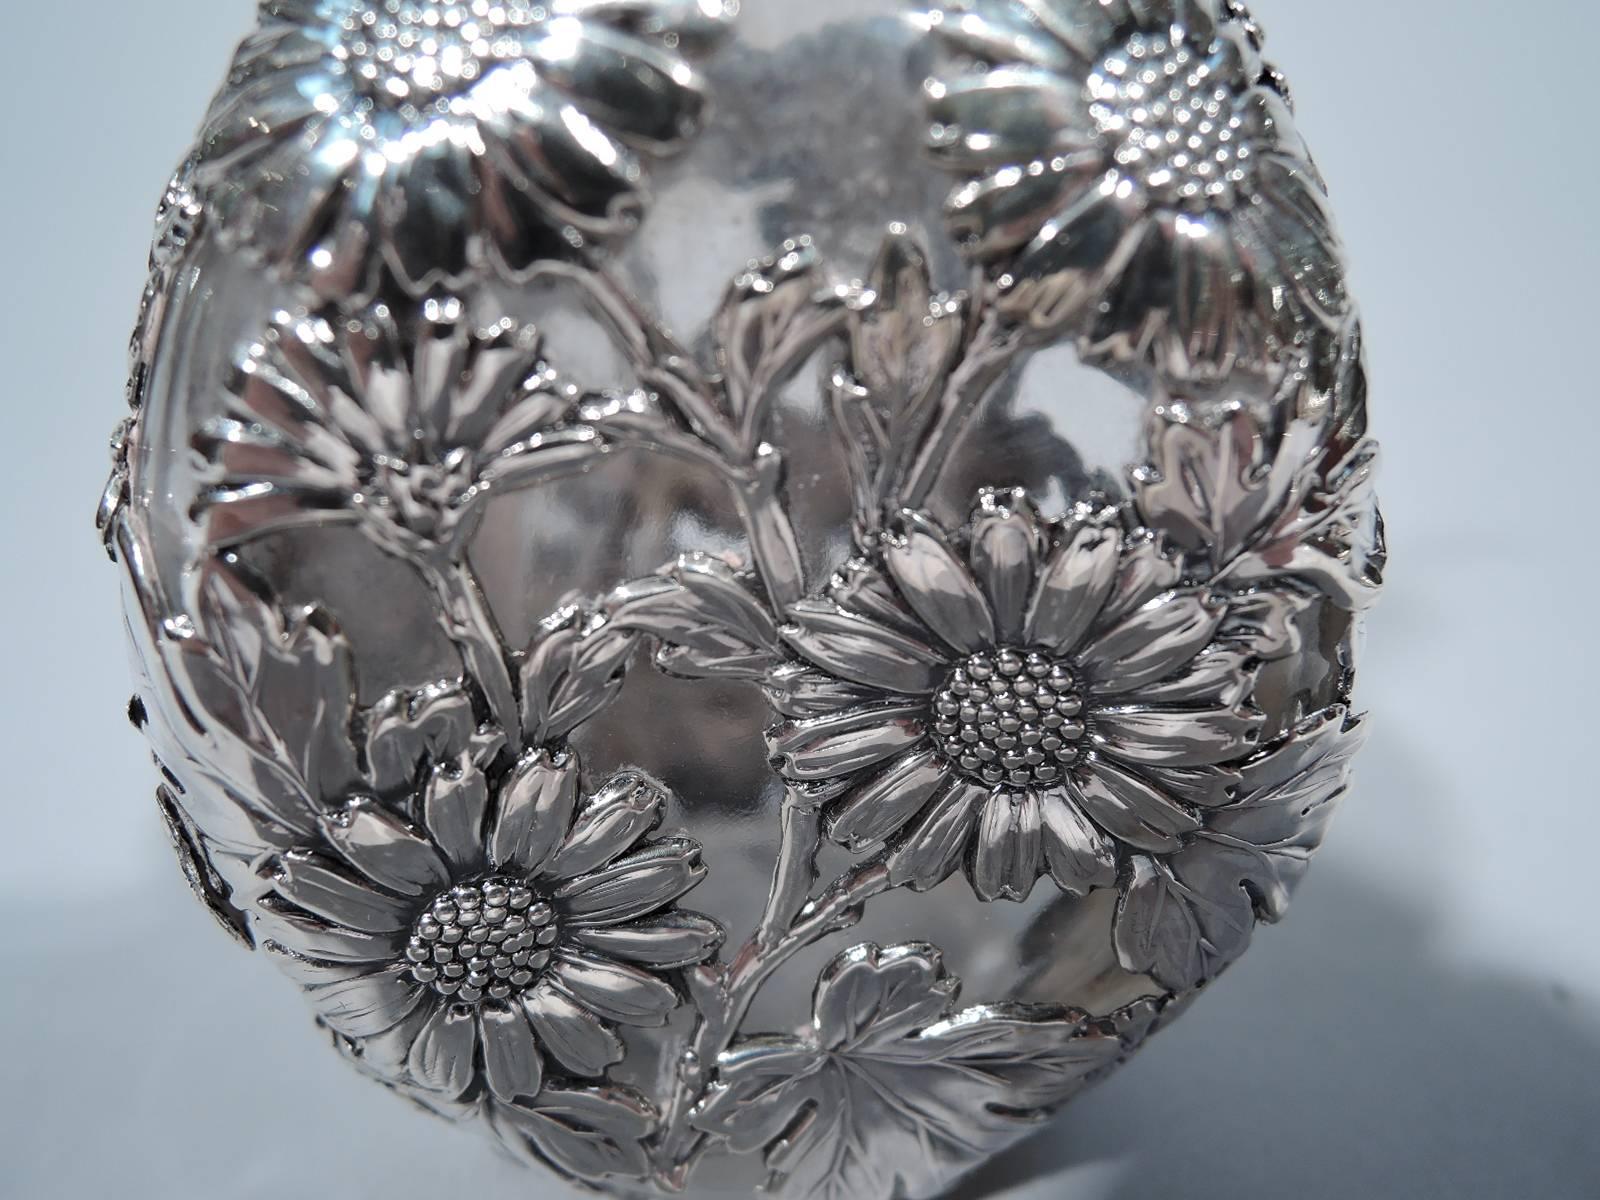 19th Century Chinese Export Silver Overlay Perfume Bottle with Daisies